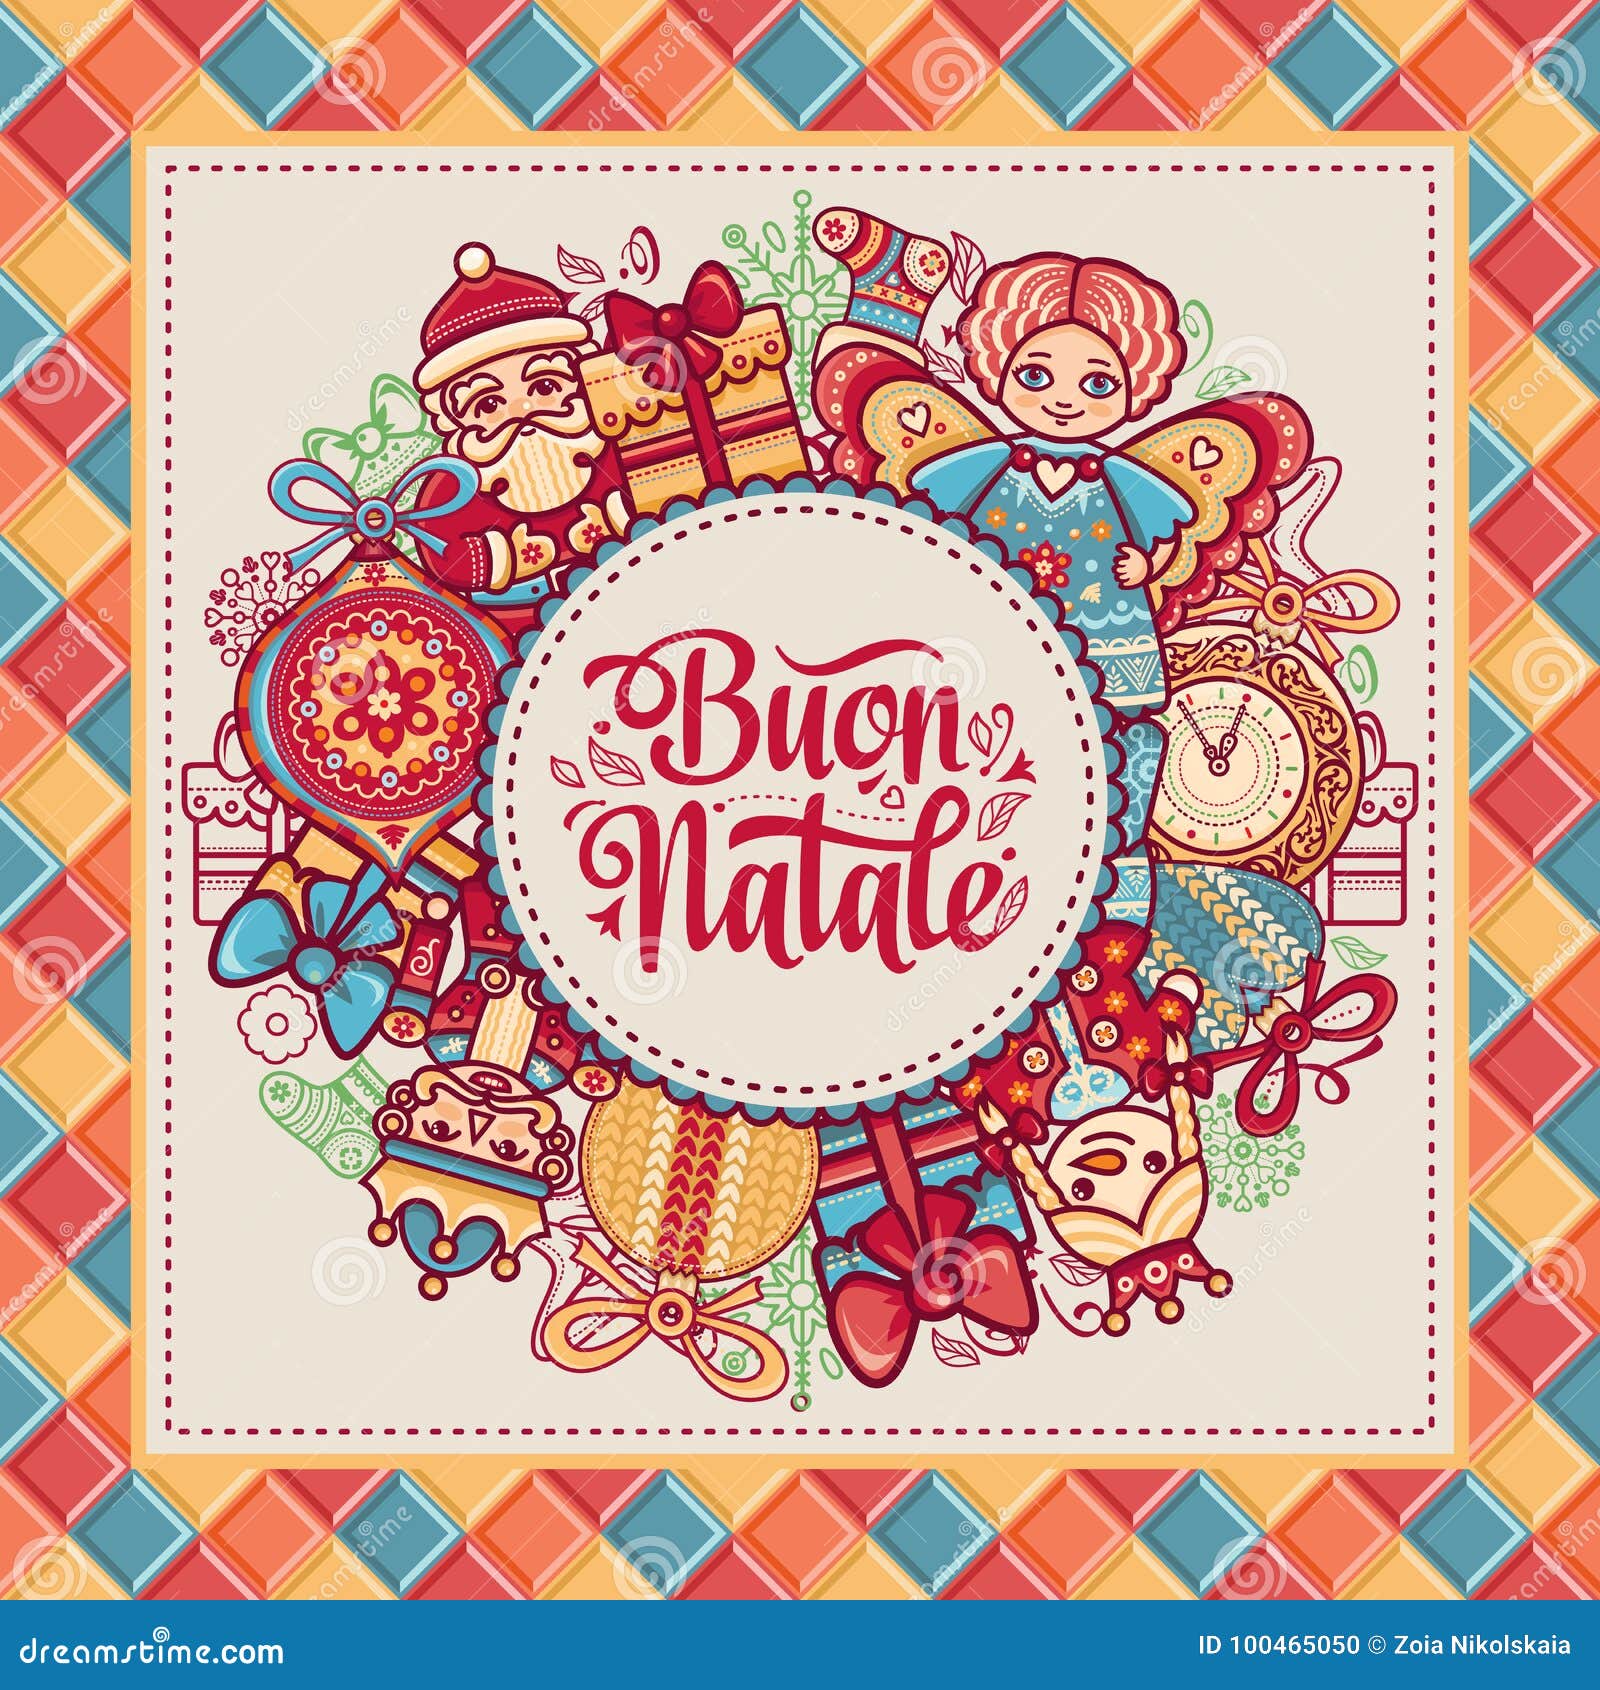 Immagini Natale Vintage.Buon Natale Greeting Card Christmas Template Winter Holiday In Italy Congratulation On Italian Vintage Style Stock Illustration Illustration Of Style Natale 100465050